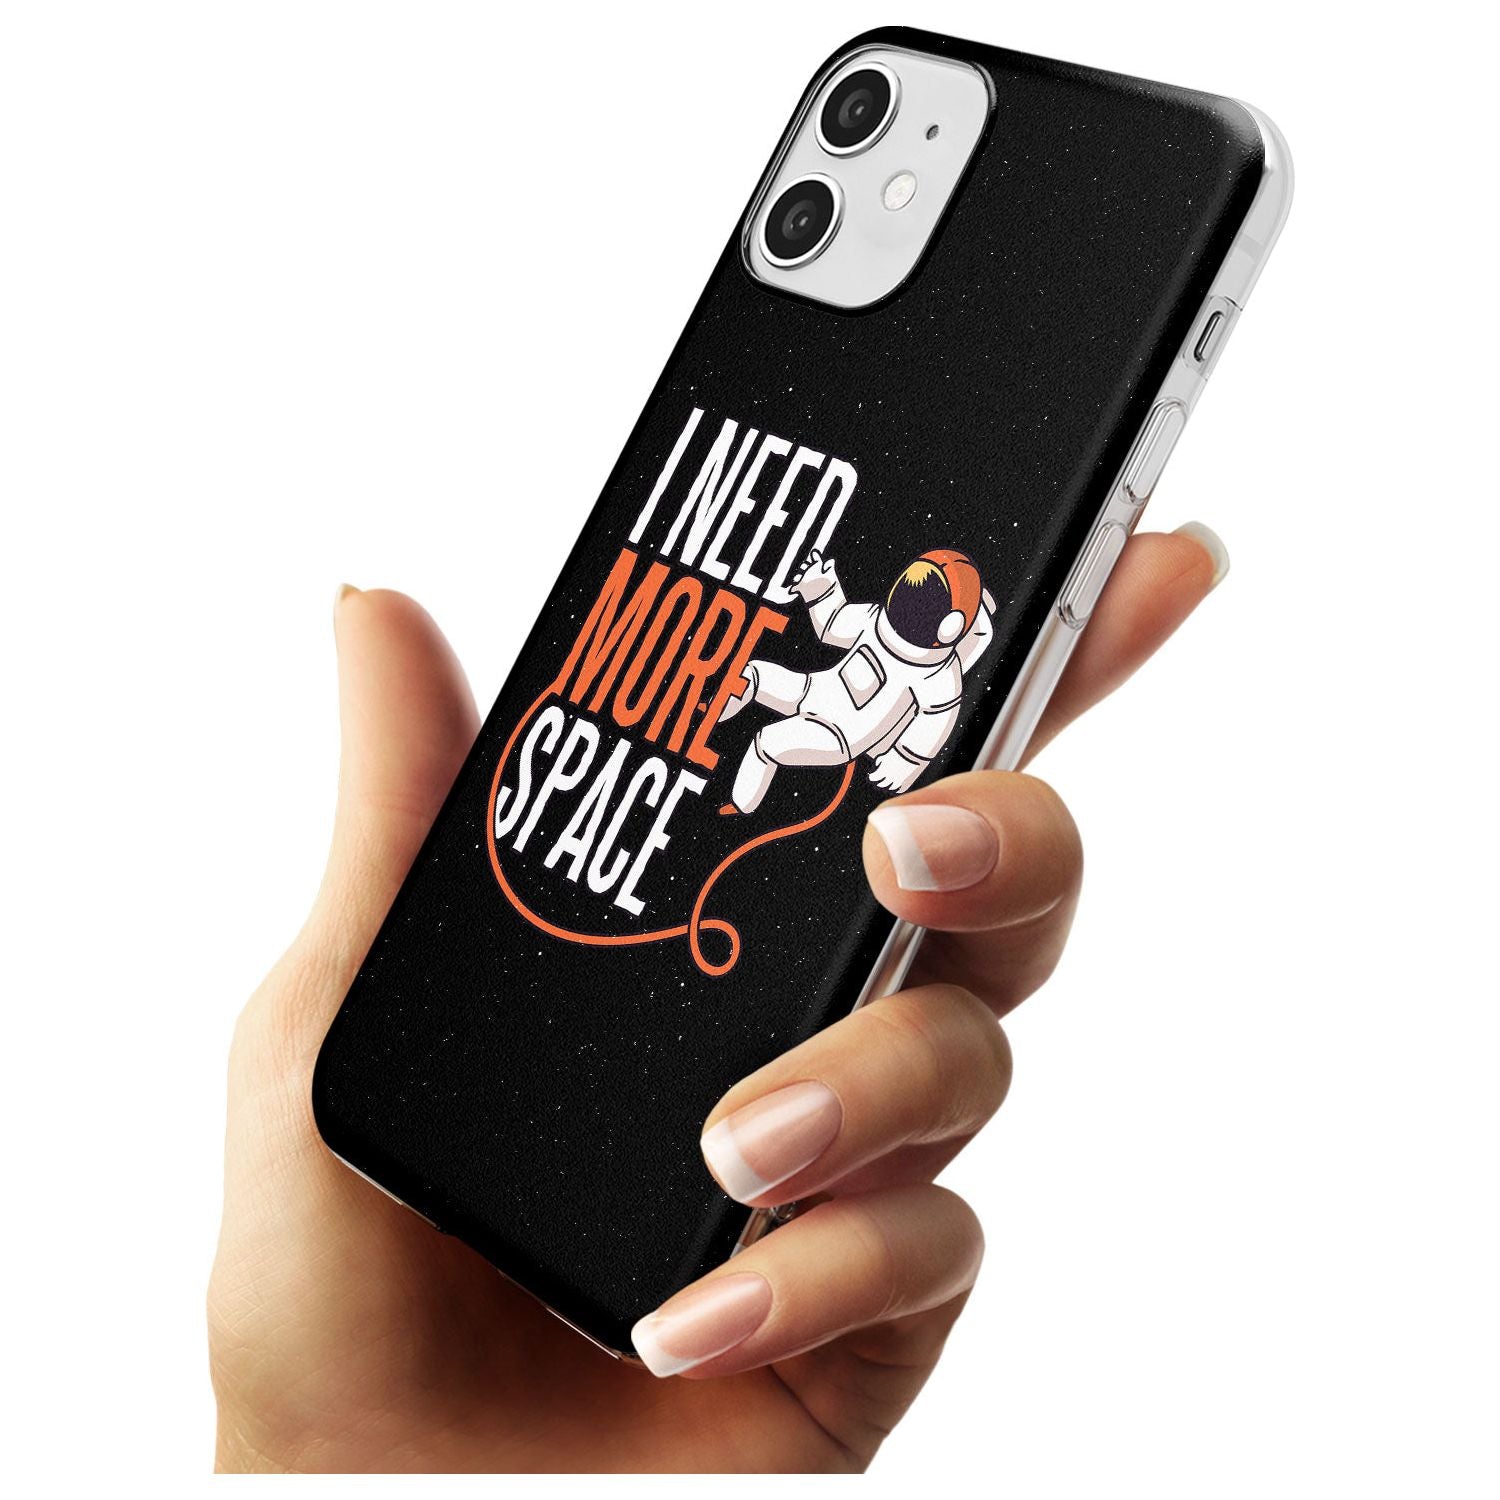 I Need More Space Black Impact Phone Case for iPhone 11